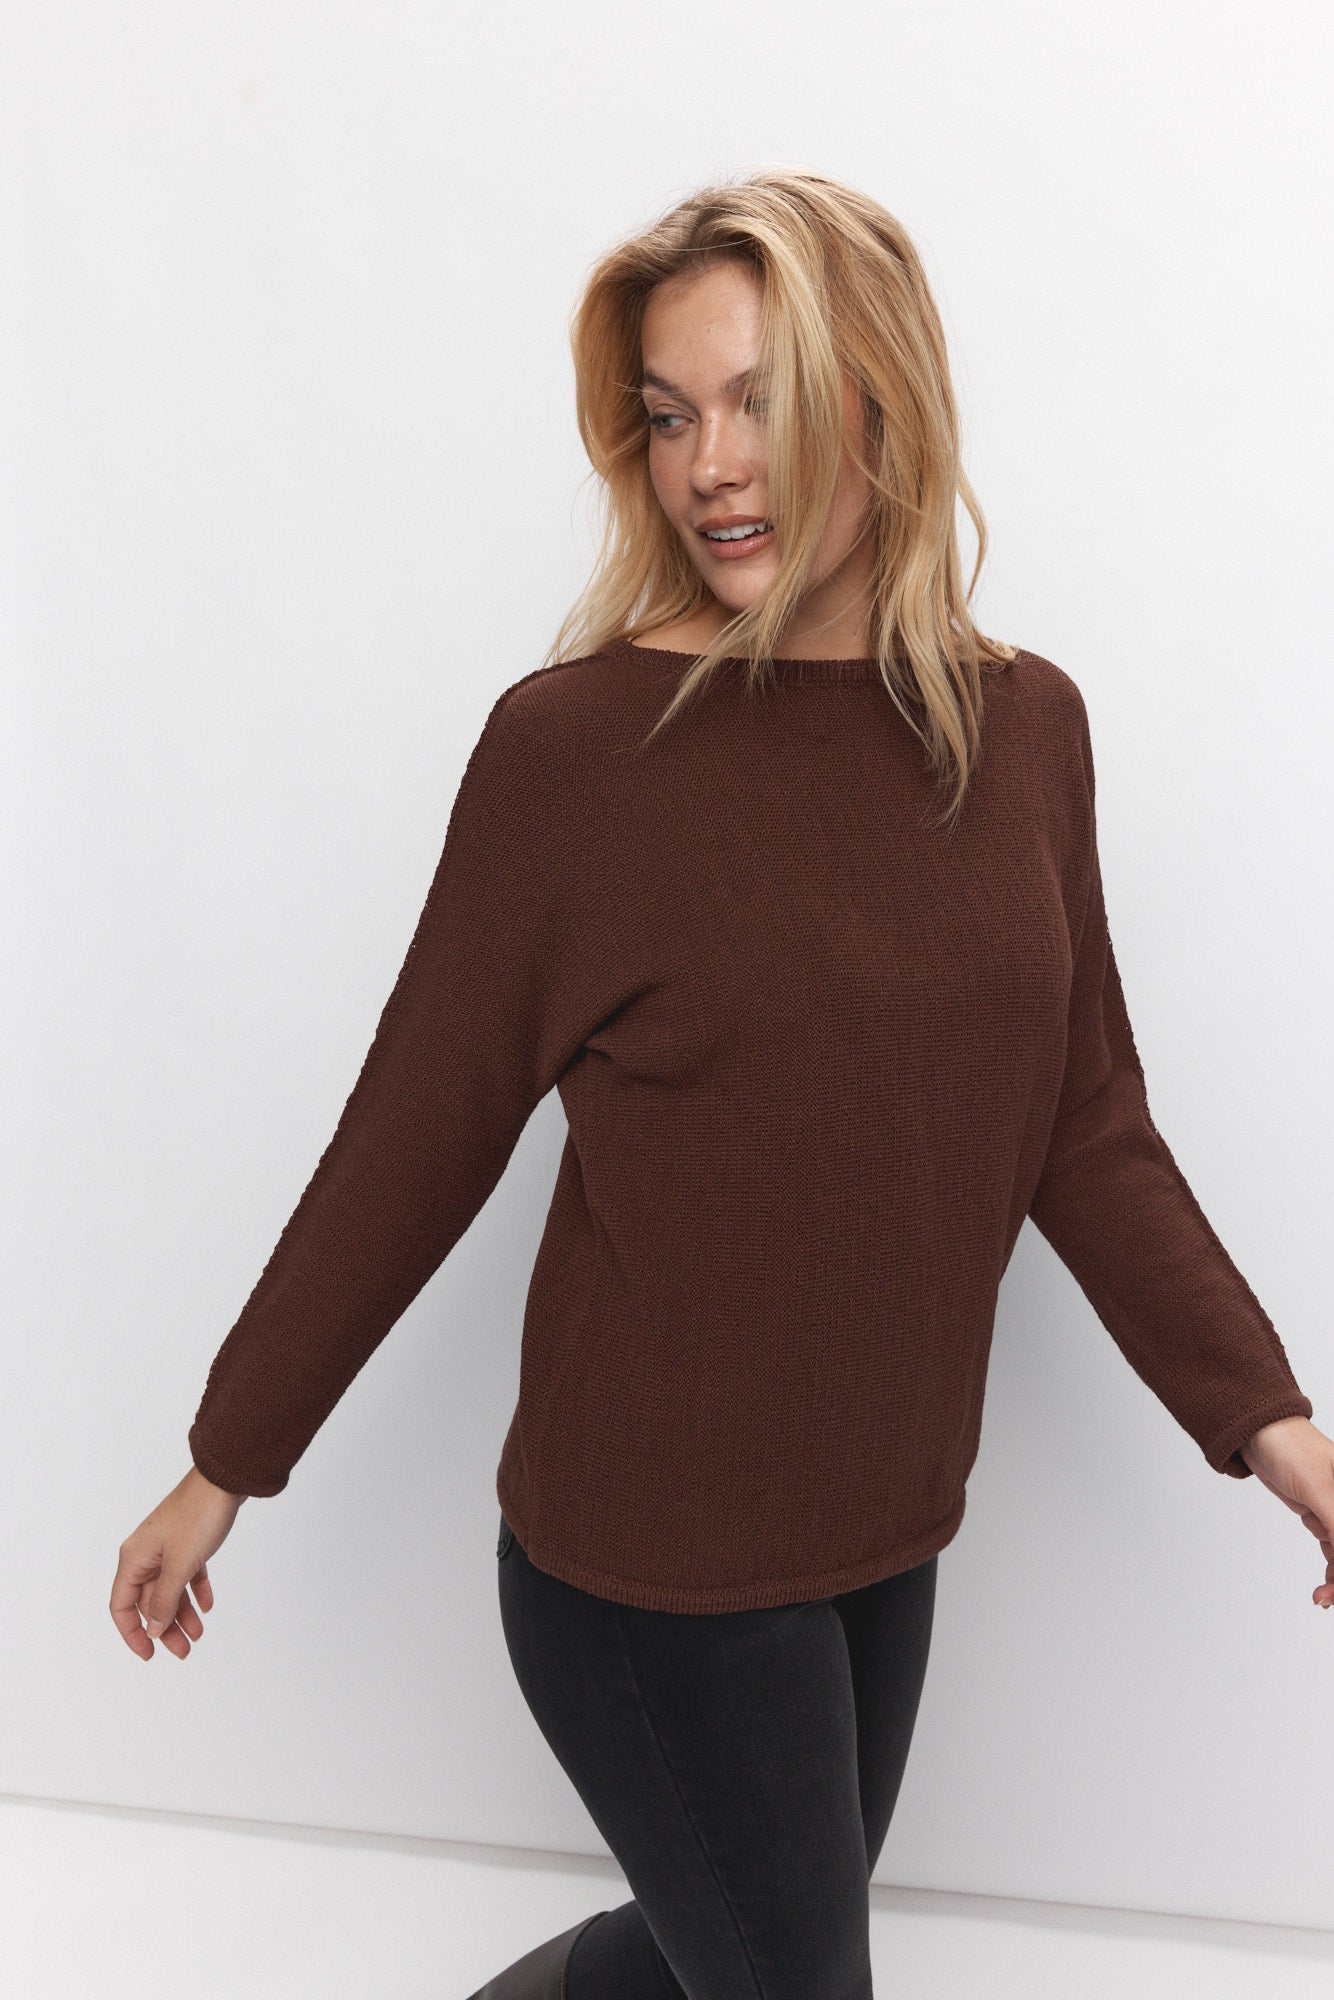 Brown long sleeve sweater | Grohl